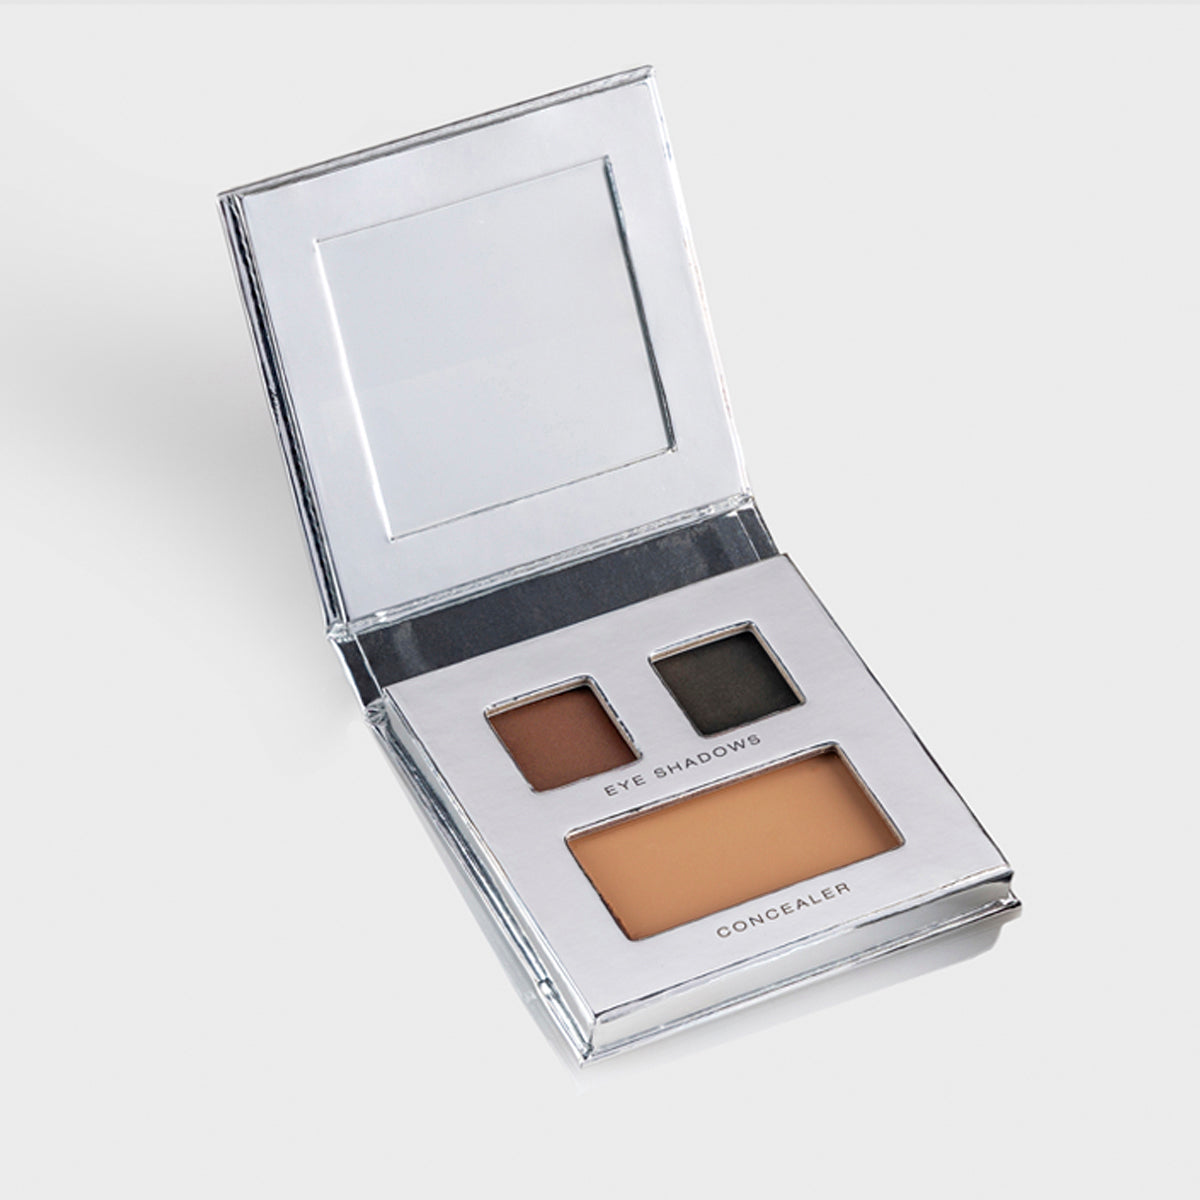 Fold Out Eyes Palette with Brown & Black Eyeshadow with concealer. Includes a mirror. IN Shade Latte.